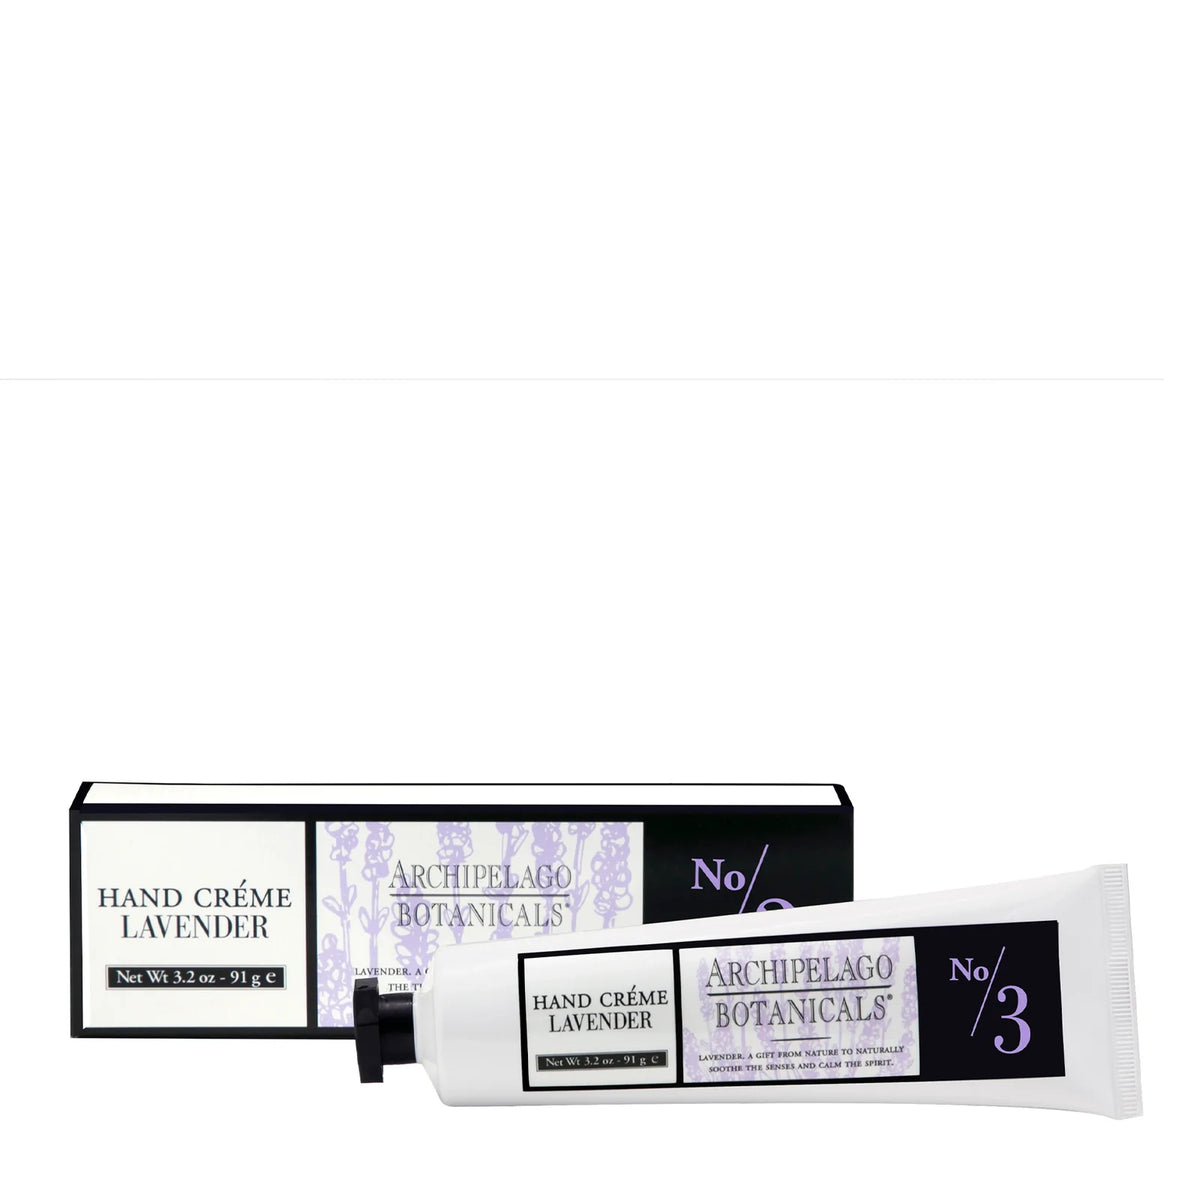 A tube of Archipelago Botanicals Lavender Hand Crème, labeled "no. 3," paraben-free, with its box partially visible behind it, against a white background.